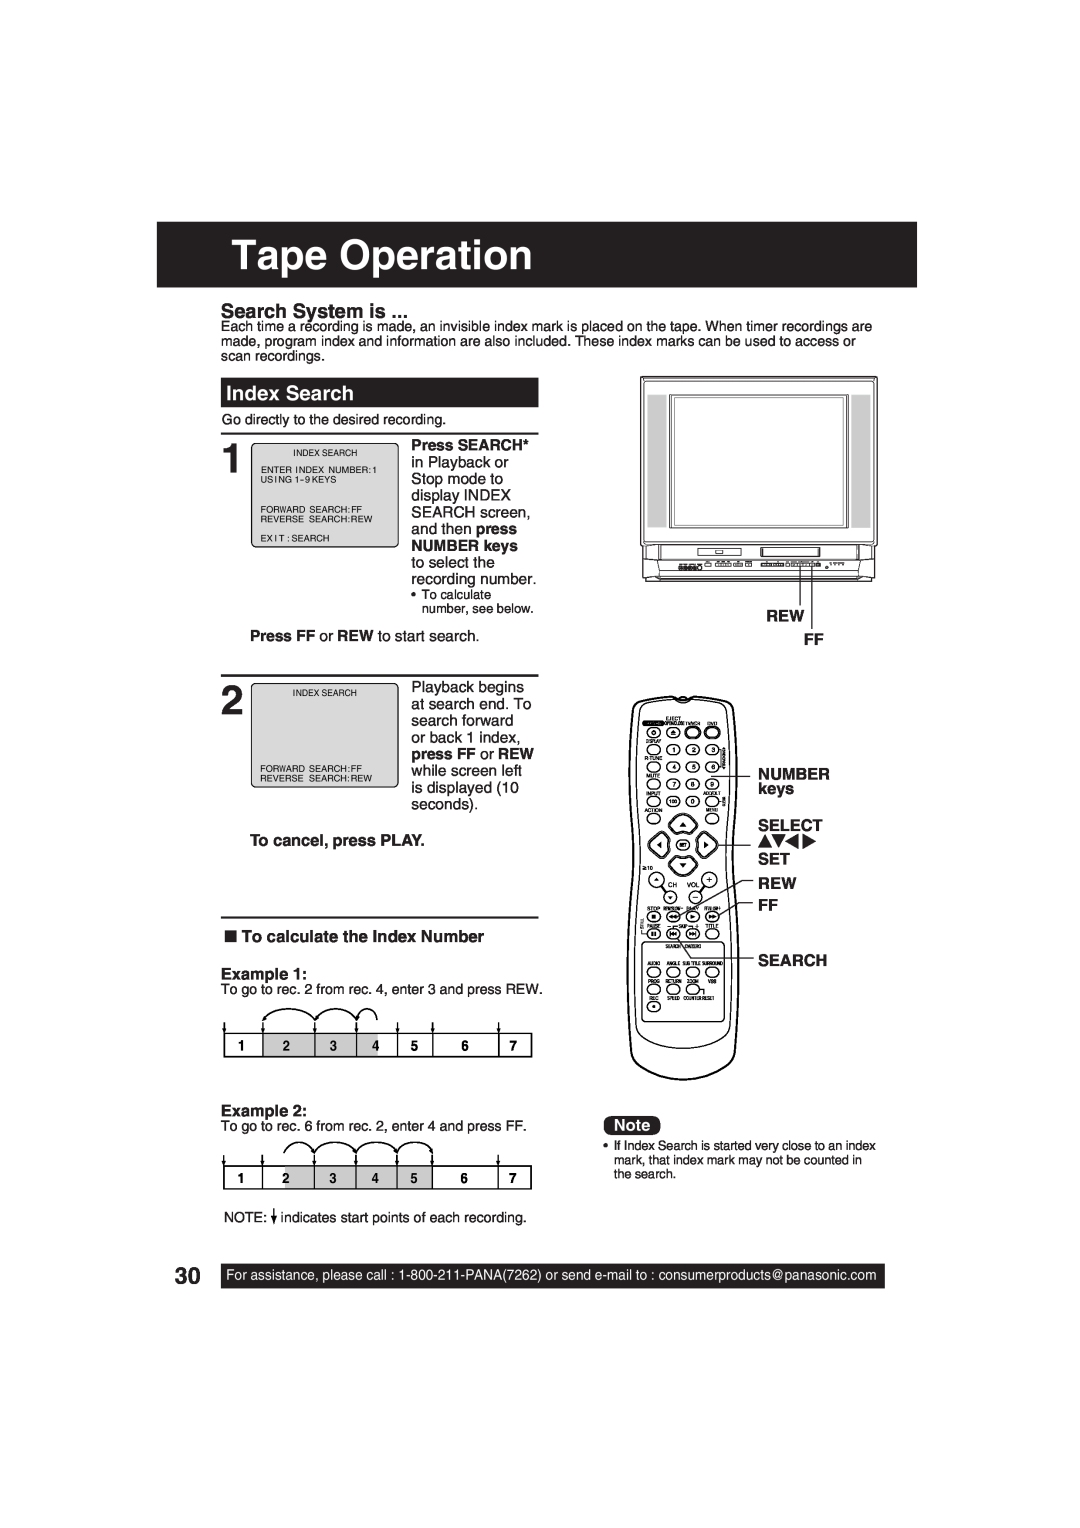 Panasonic PV-DF203 Tape Operation, Search System is, Index Search, NUMBER keys SELECT, Set Rew Ff Search, Example 